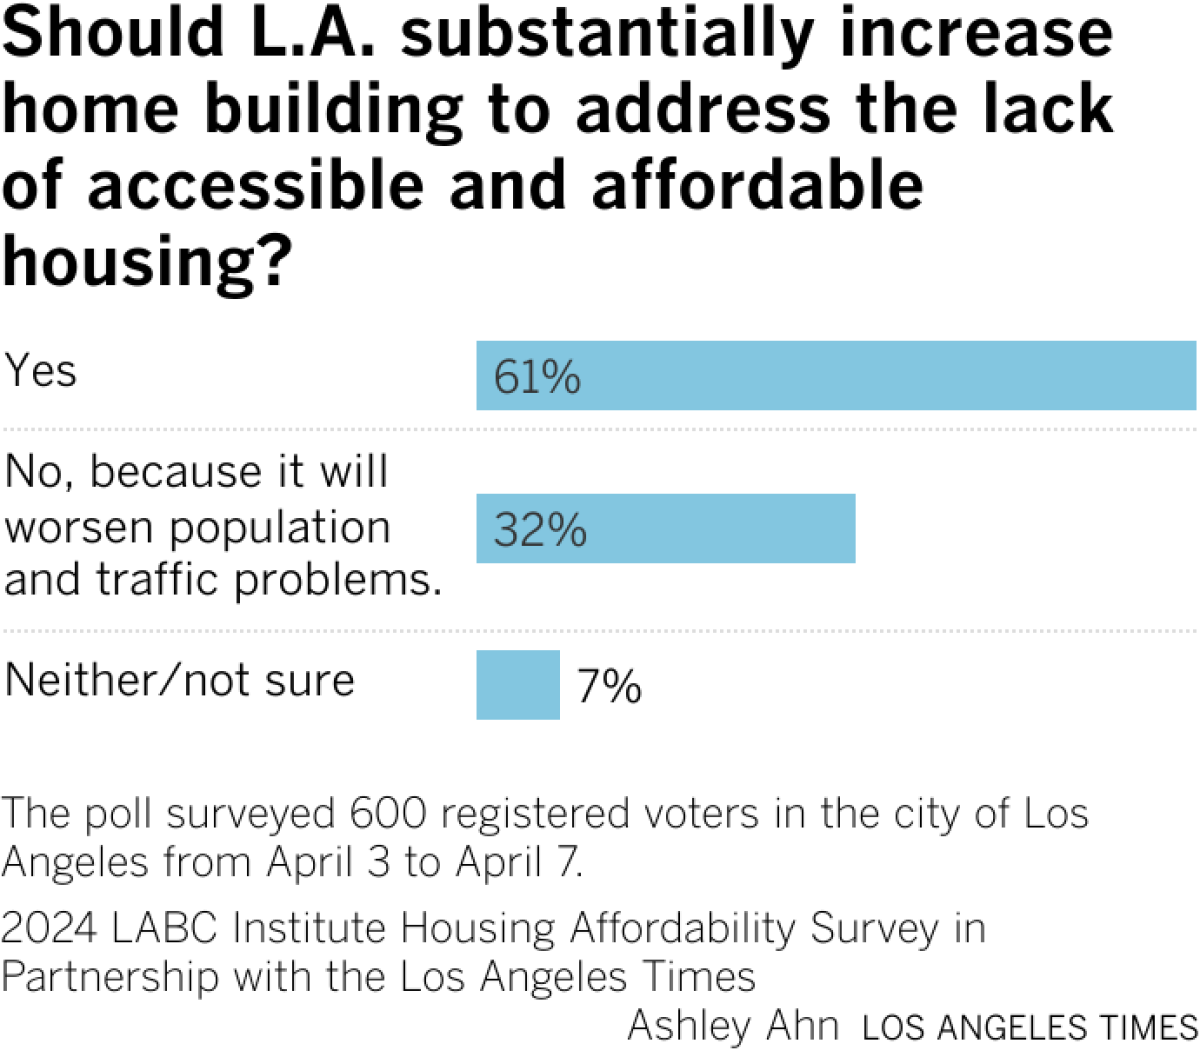 About 61% of respondents said L.A. should substantially build more housing units to address the lack of accessible and affordable housing, while 32% said no. About 7% said neither or not sure.